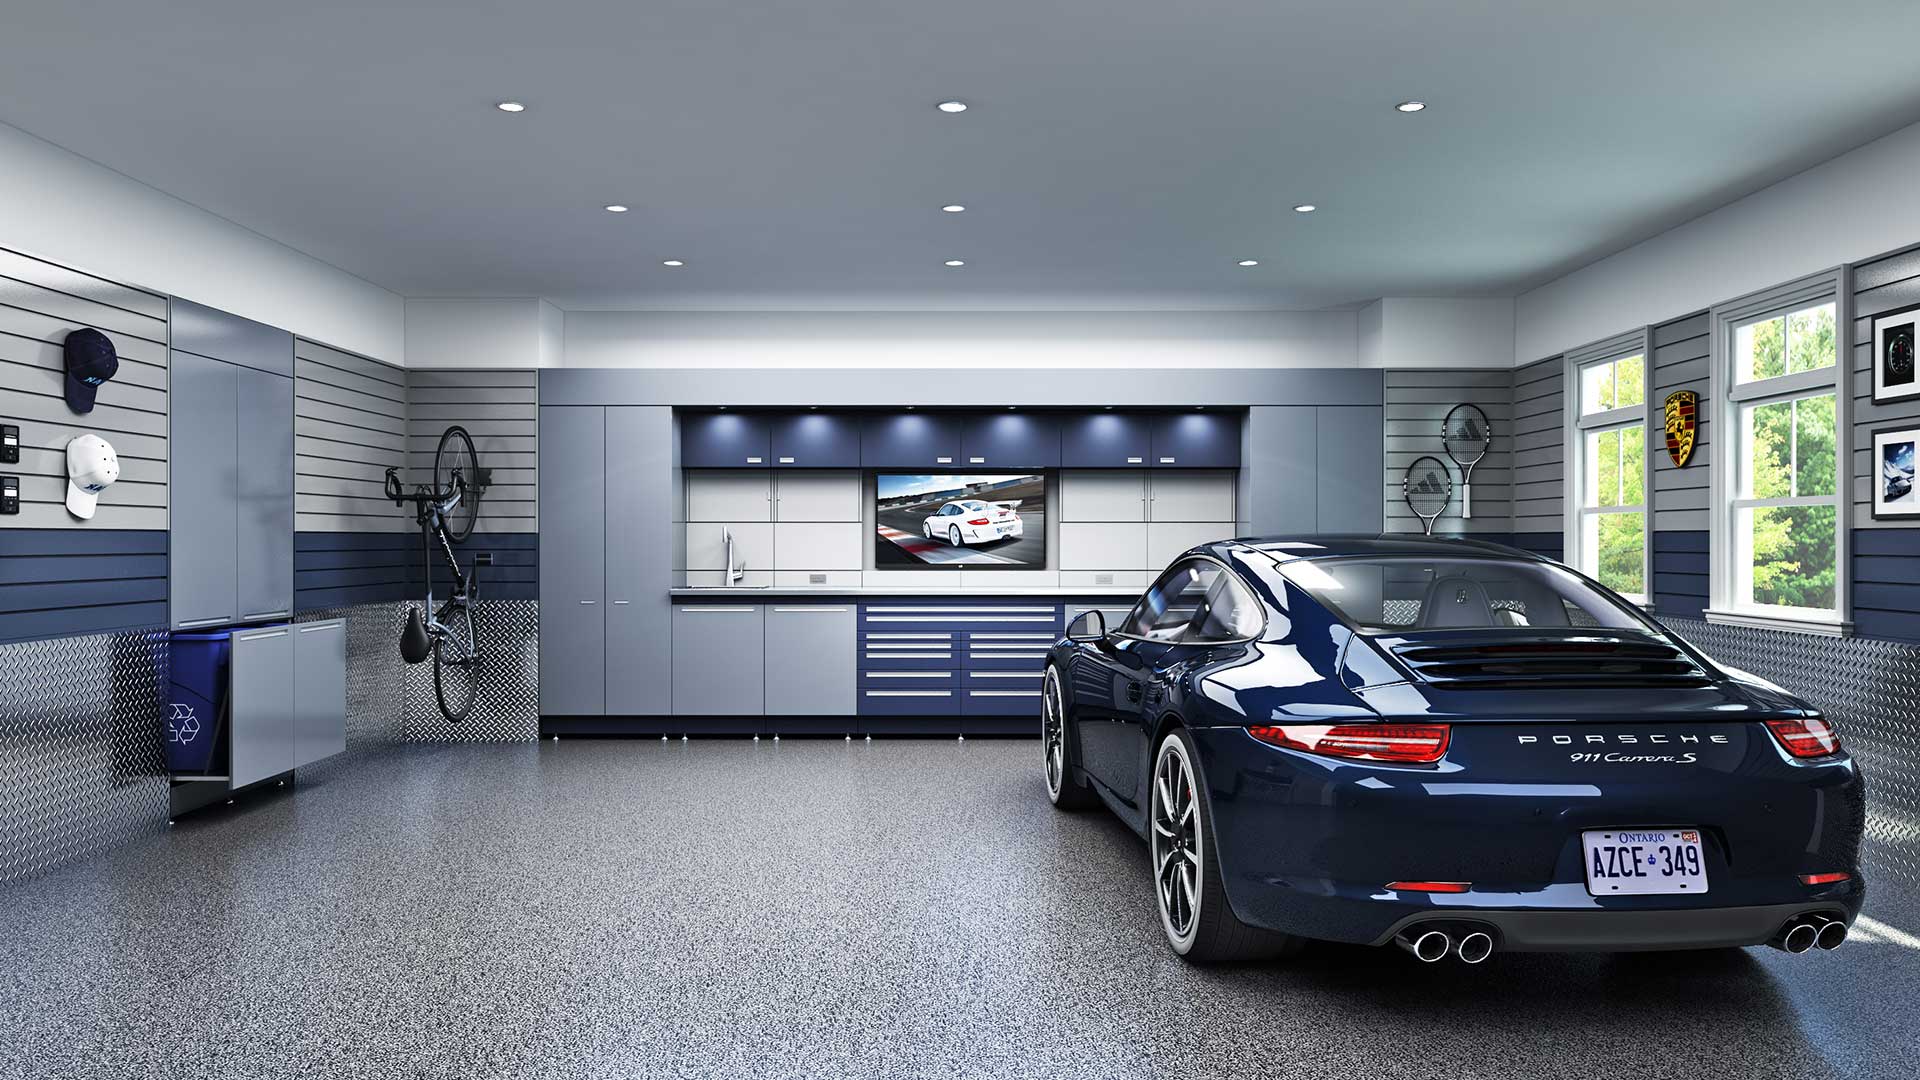 Increase Your Homes Resale Value with Our Top 6 Garage Flooring Upgrades